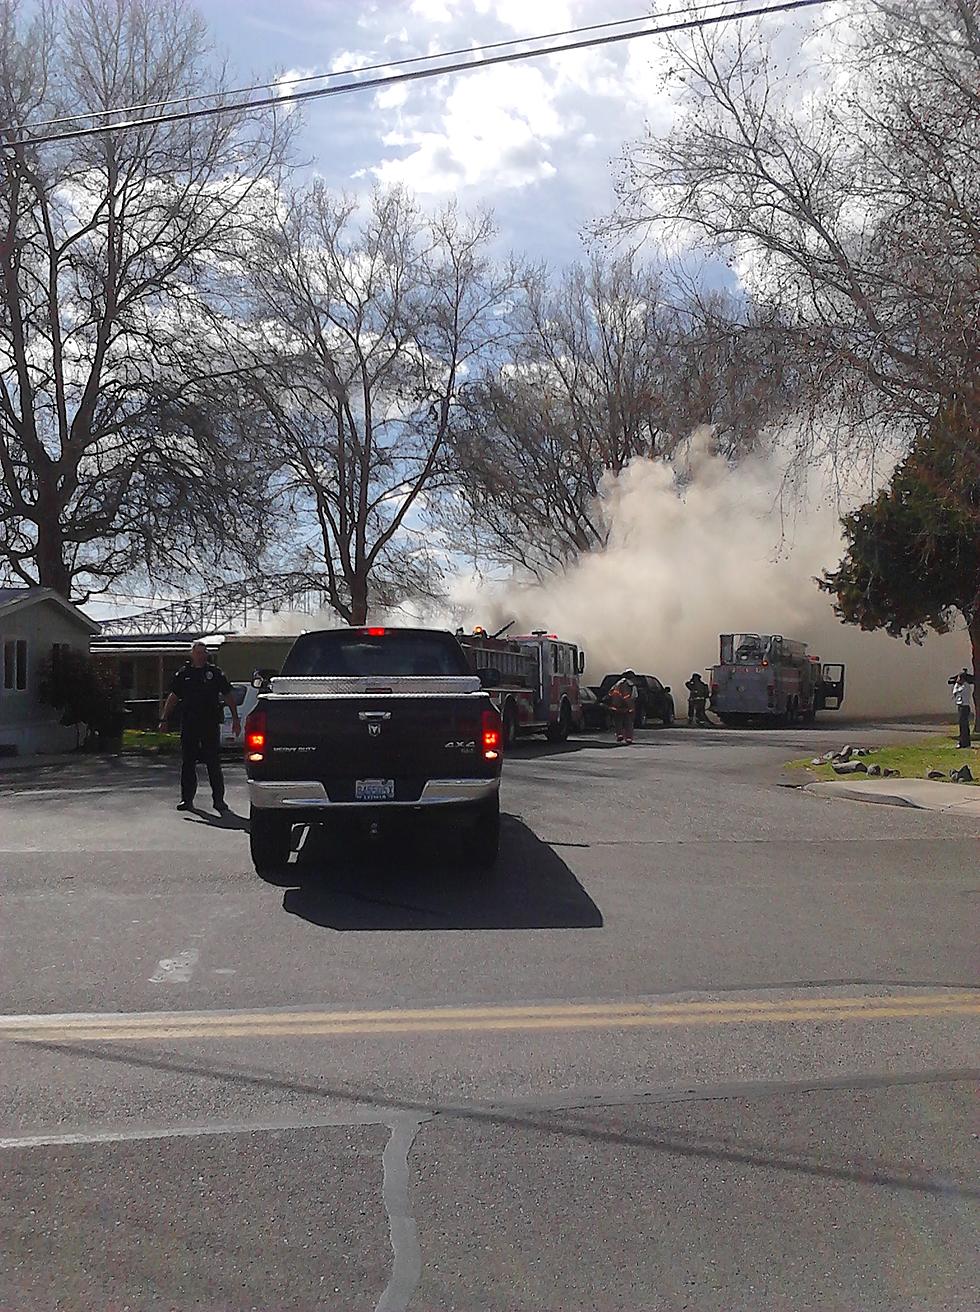 First Responders Battling Trailer Fire in Pasco – 28th and A Street